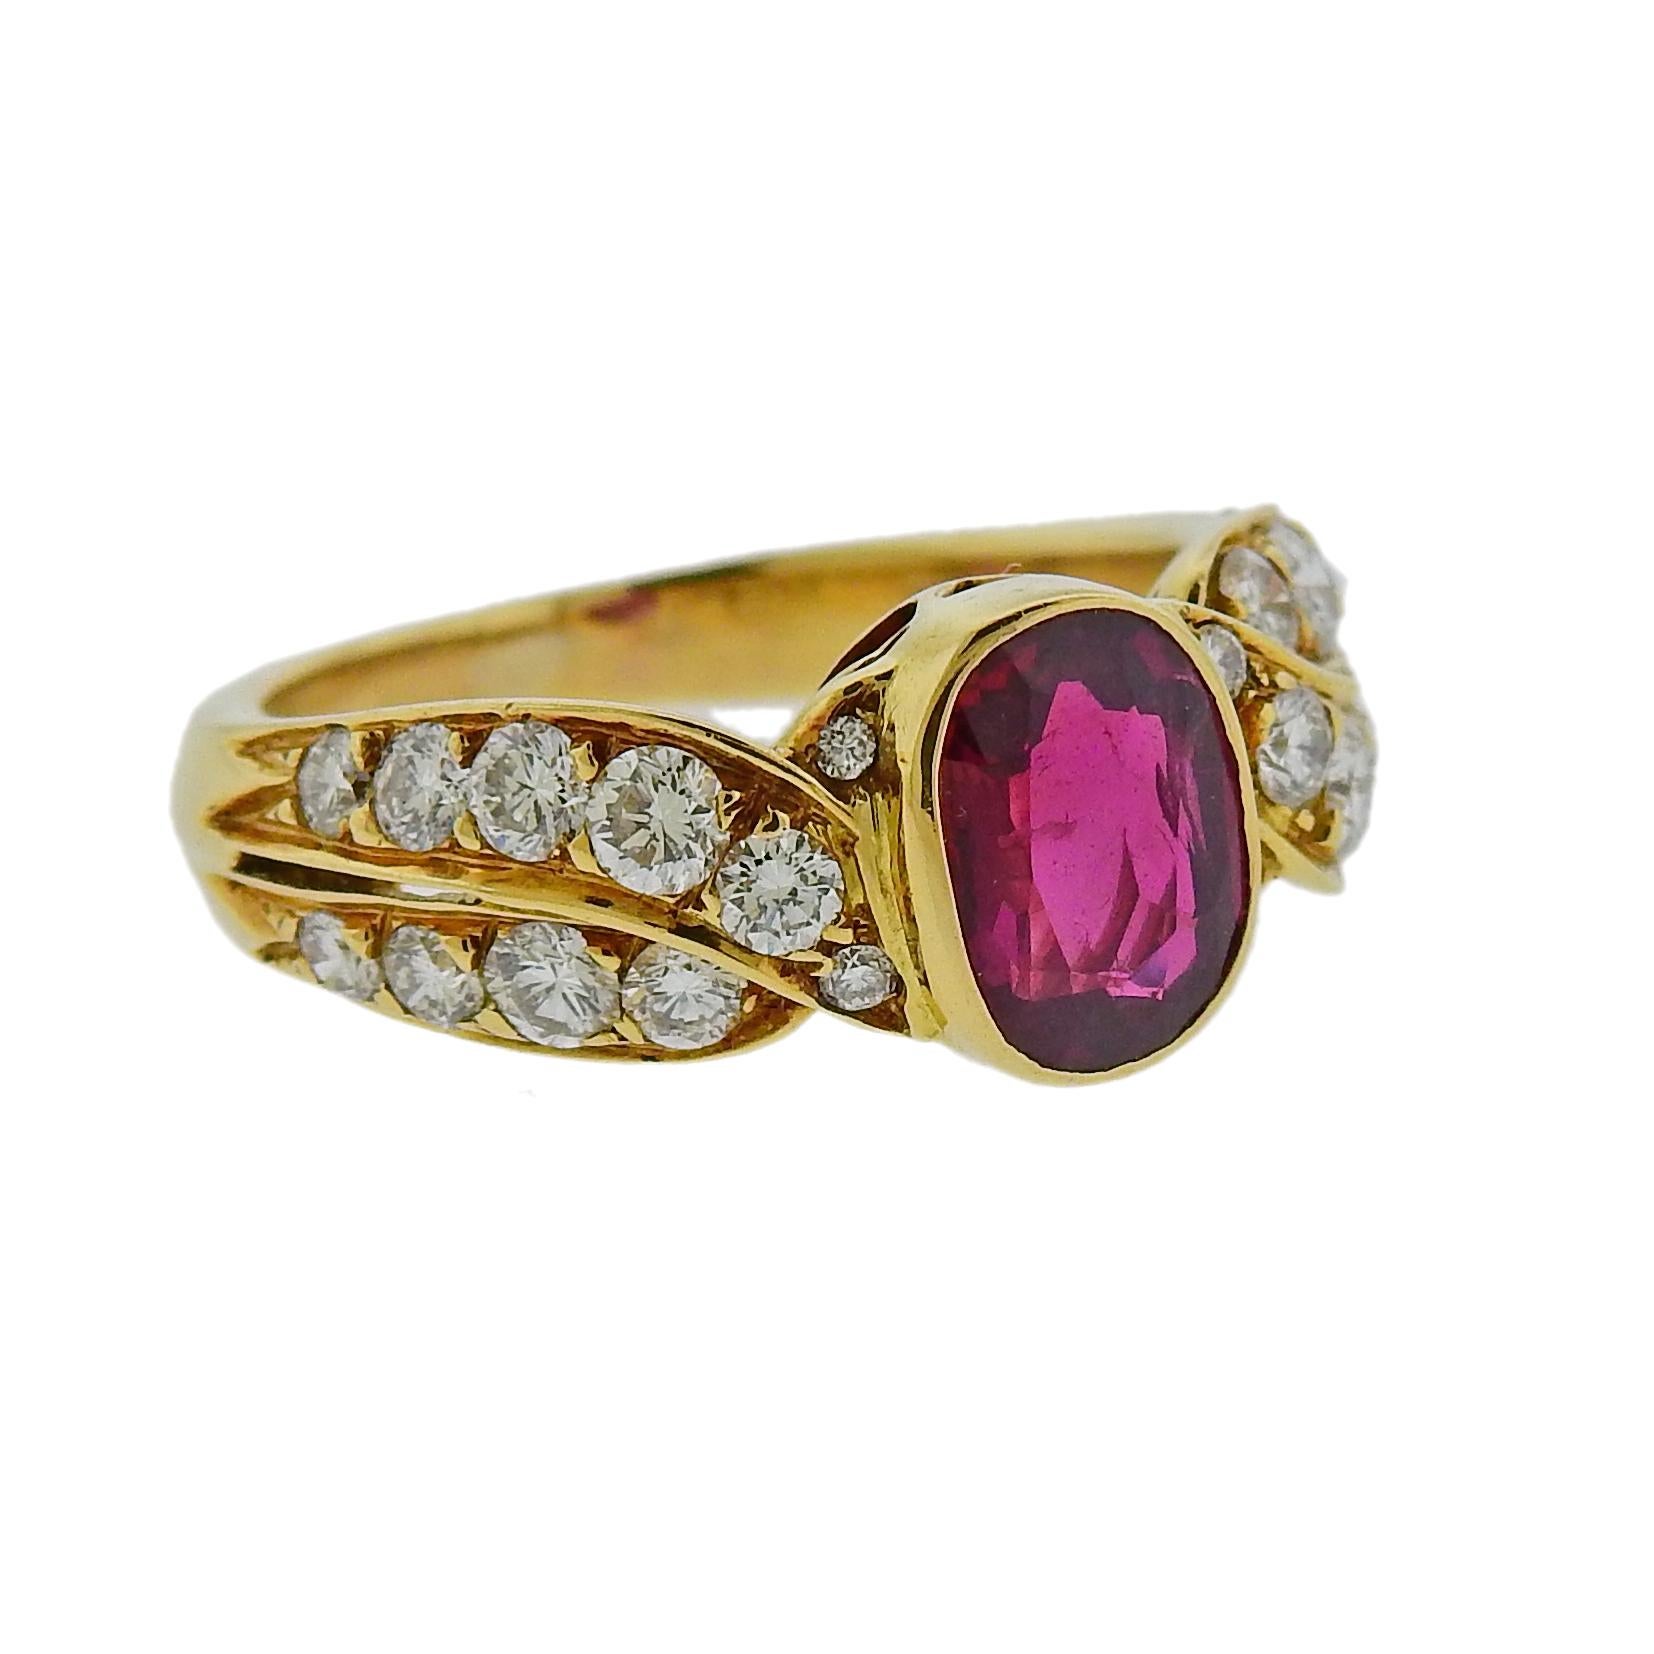 AGL certified 1.51ct no heat Burmese ruby (measuring approx. 8.1mm x 5.9mm x 2.8mm), set in Van Cleef & Arpels 18k gold ring setting, surrounded with  0.90ctw in FG/VVS diamonds. Comes with VCA Valuation report copy. Ring size - 6,  top measures -